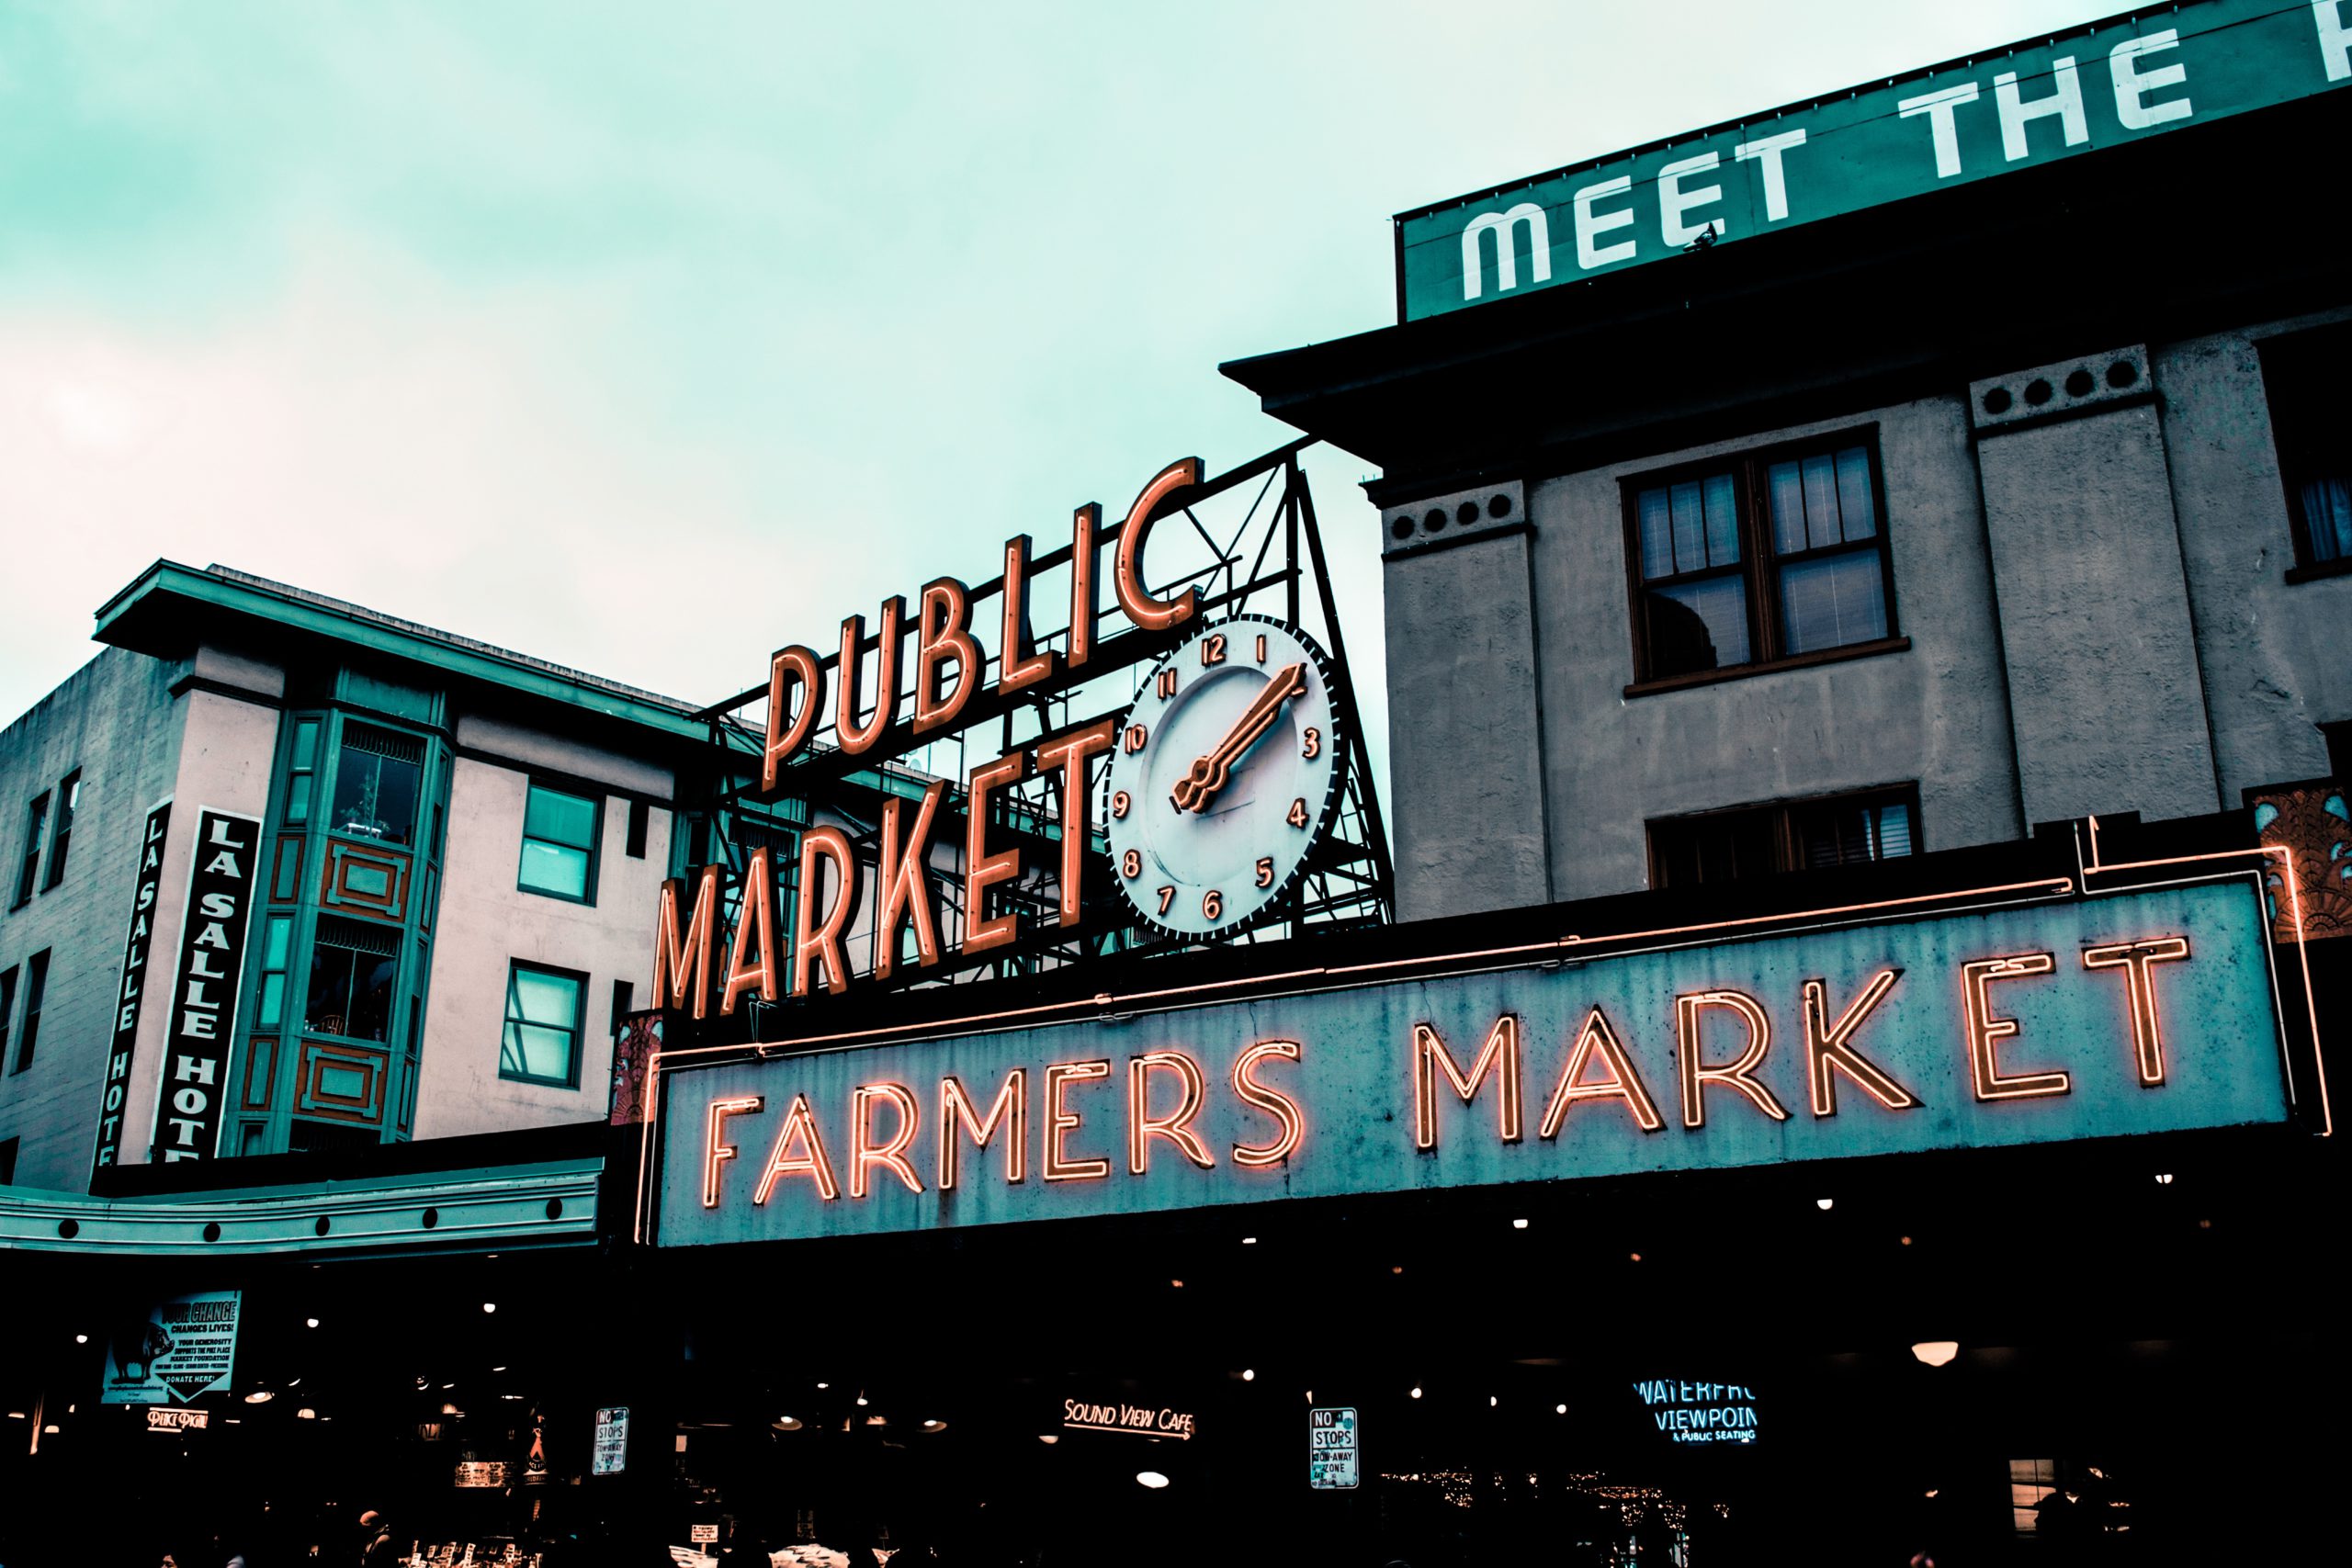 The Pike Place Market in Seattle